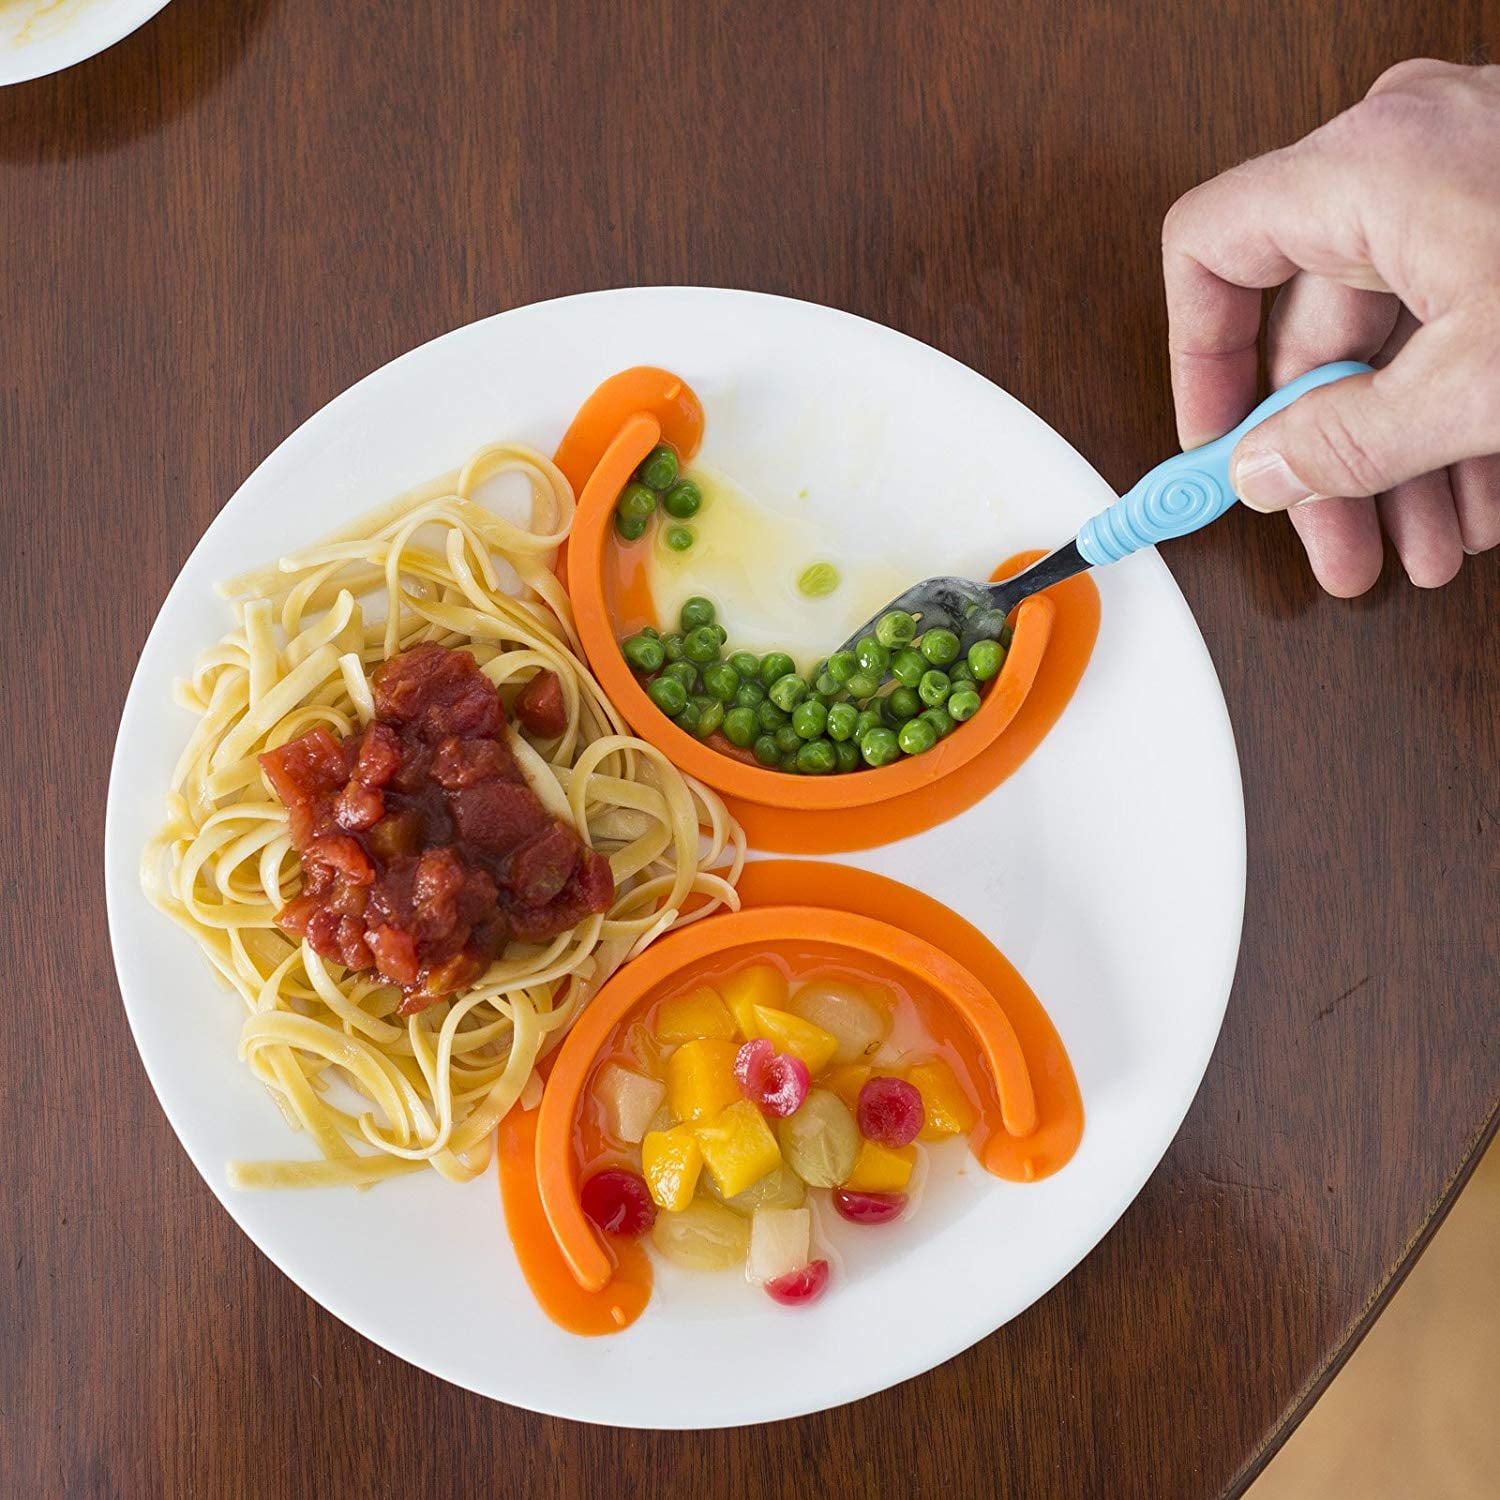 This Divider Keeps Foods Separated on Your Plate